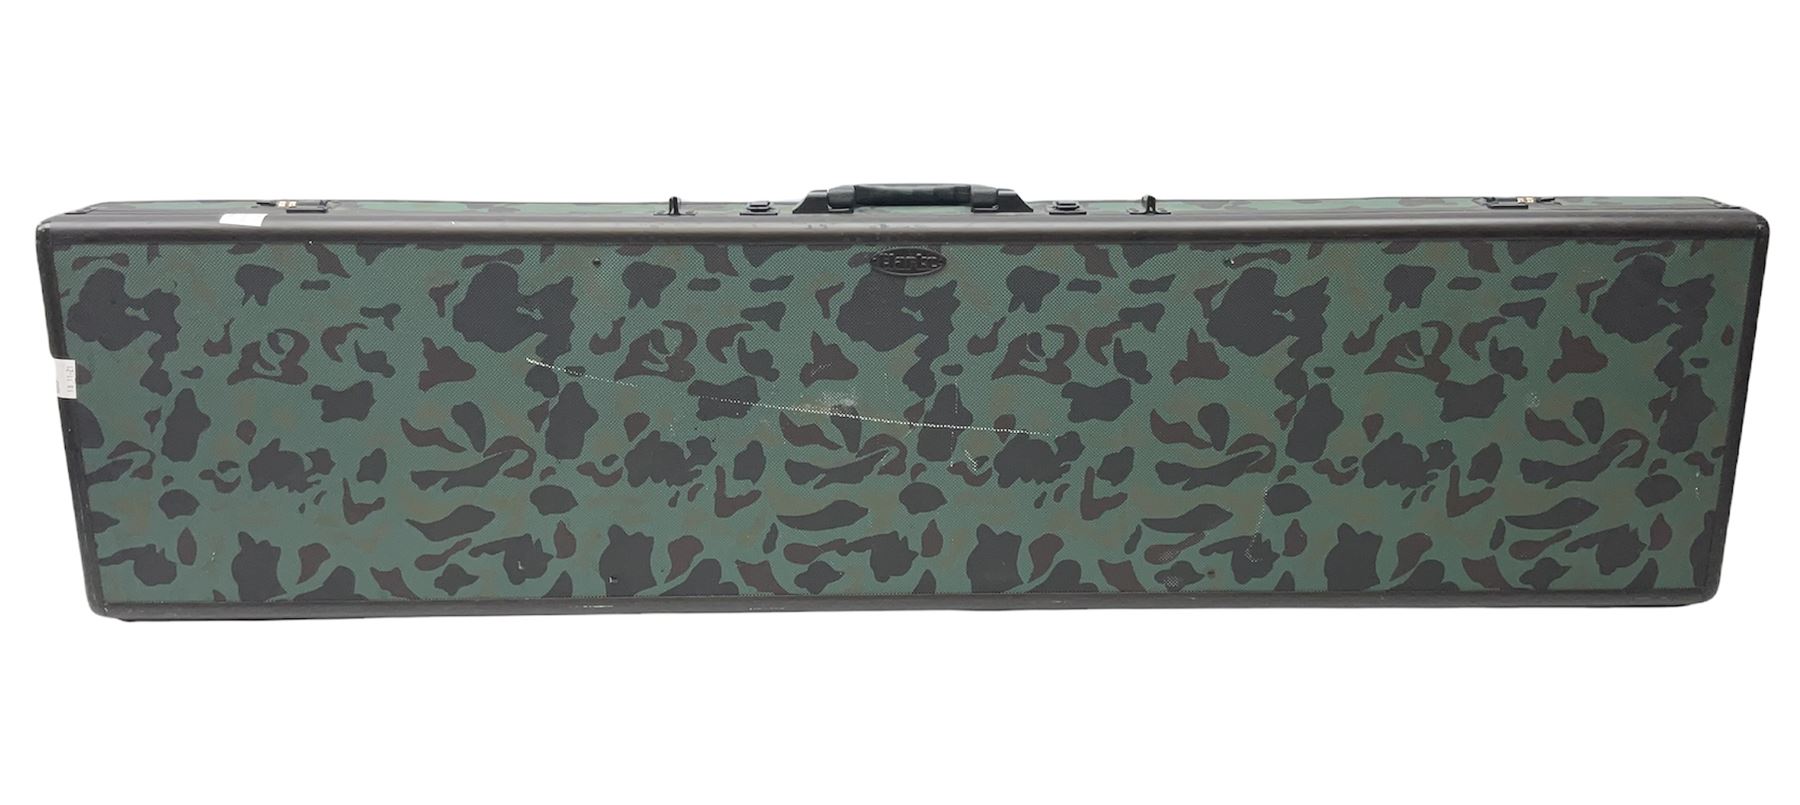 Clarke flight case for guns with camouflage finish